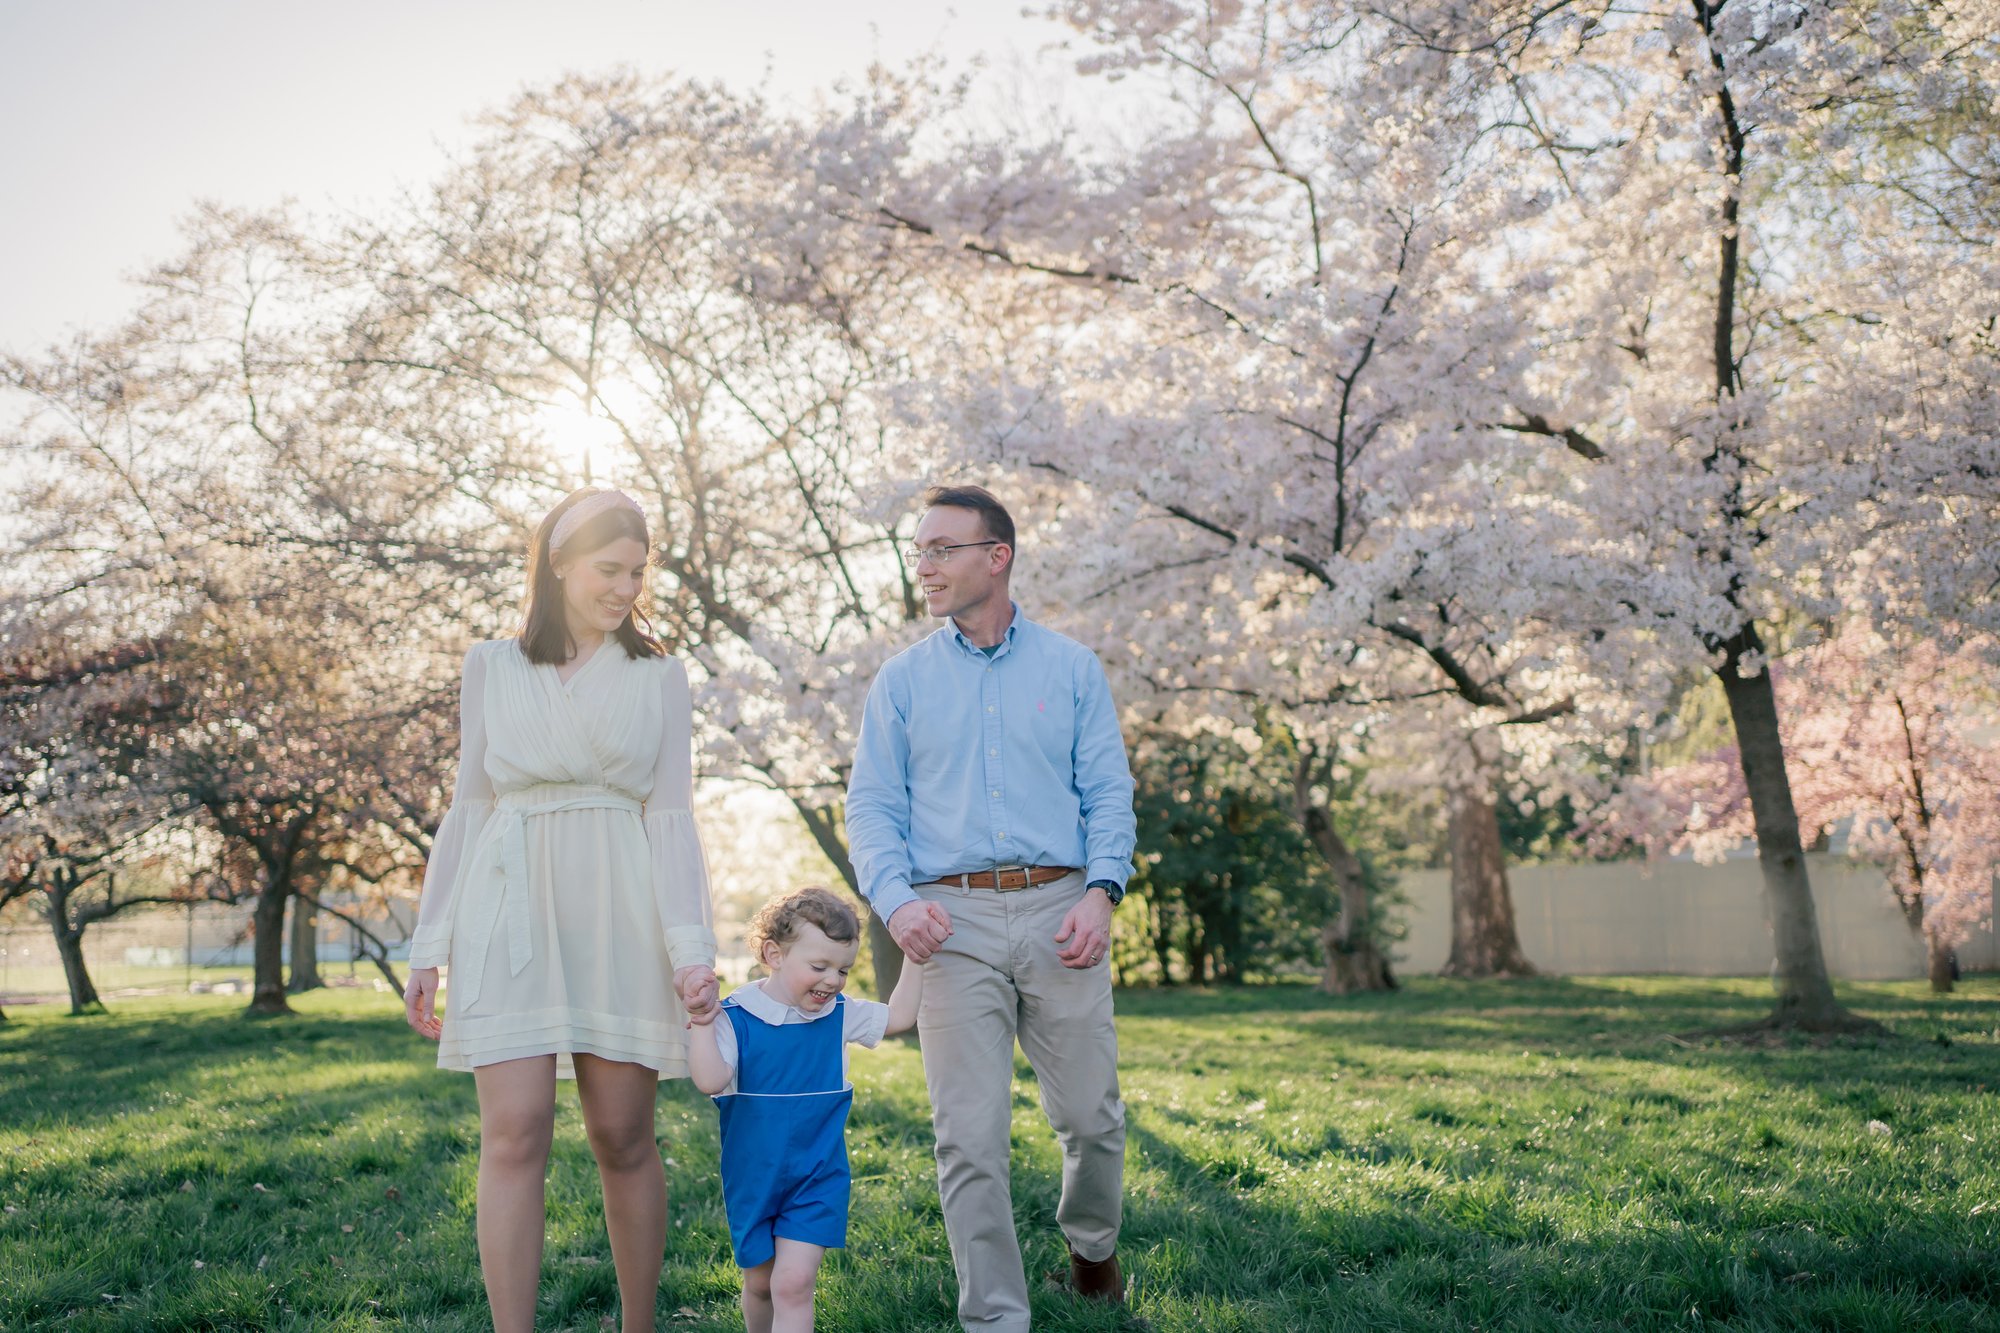 Family photography session in Washington DC captured by Stephanie Grooms Artistry